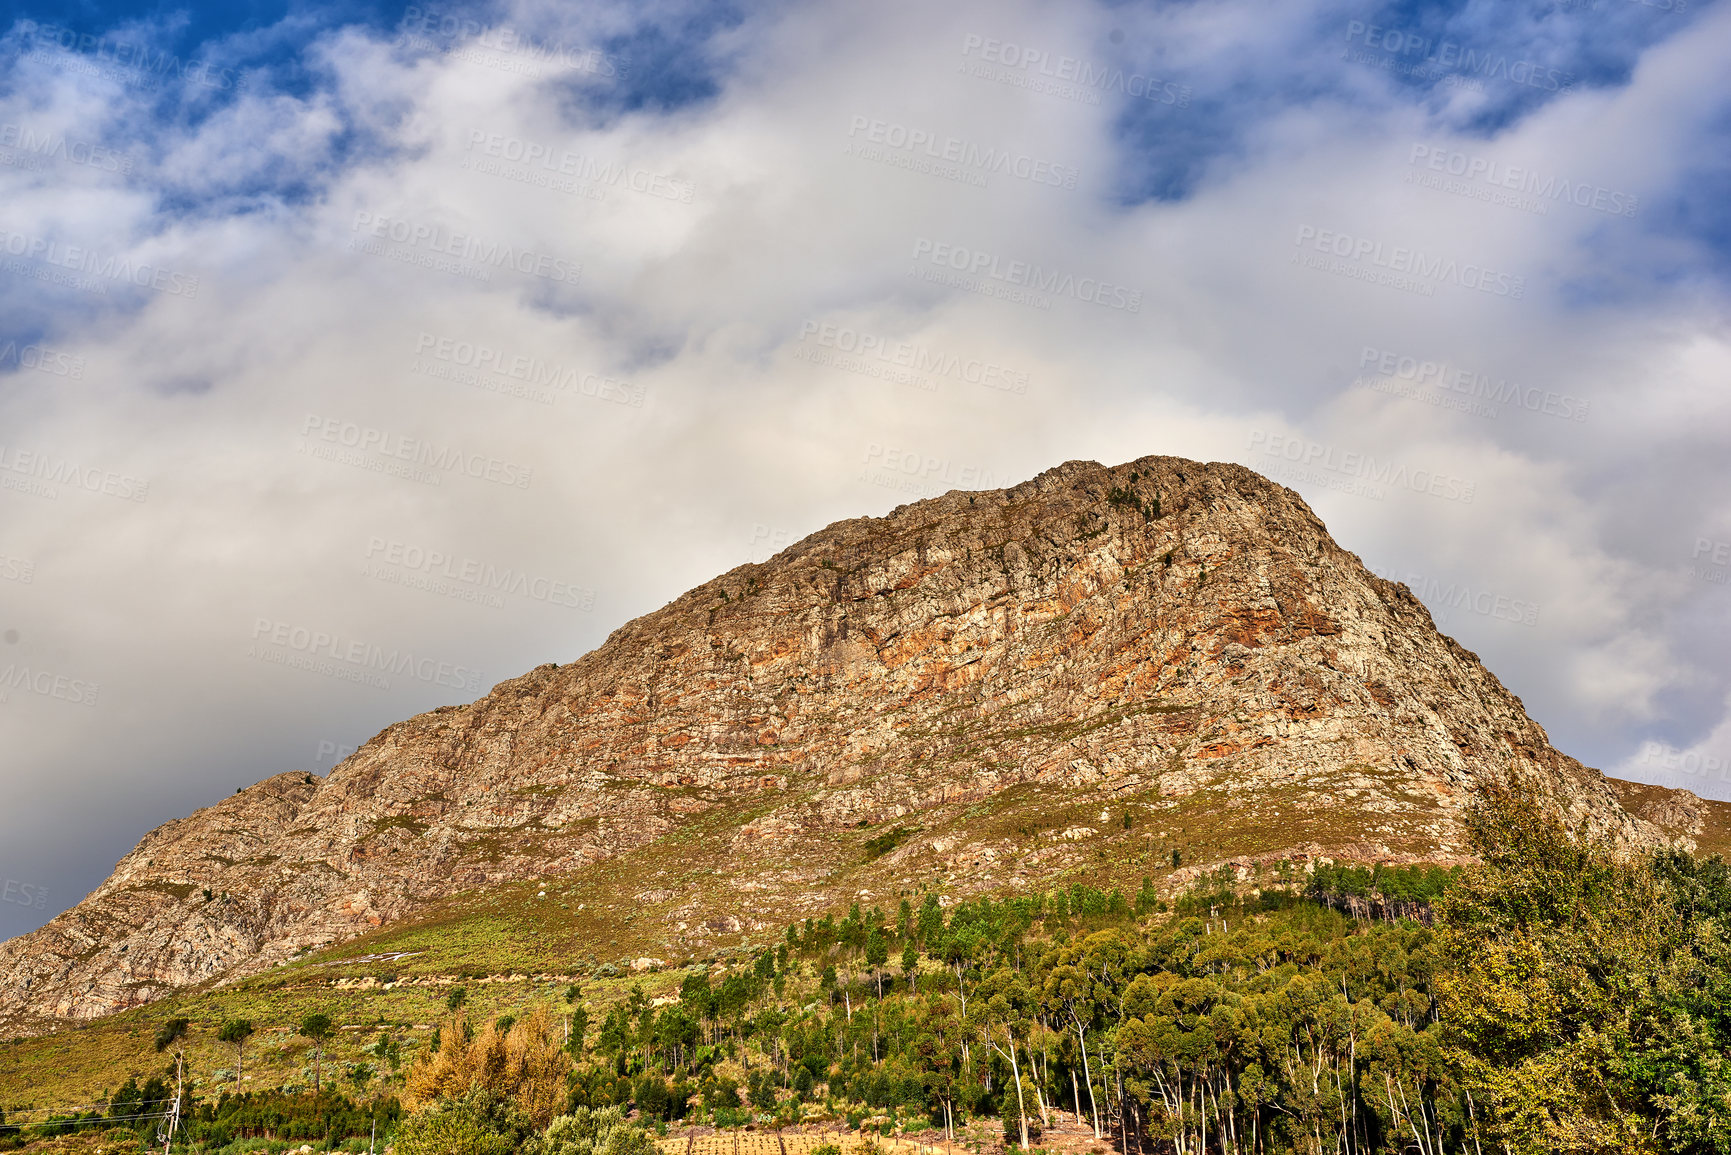 Buy stock photo A bottom view picture of Table mountain. A beautiful nature view of a high mountain shaped like a lion's head with forest, and a cloudy sky in the background. Copy space with scenic landscape view